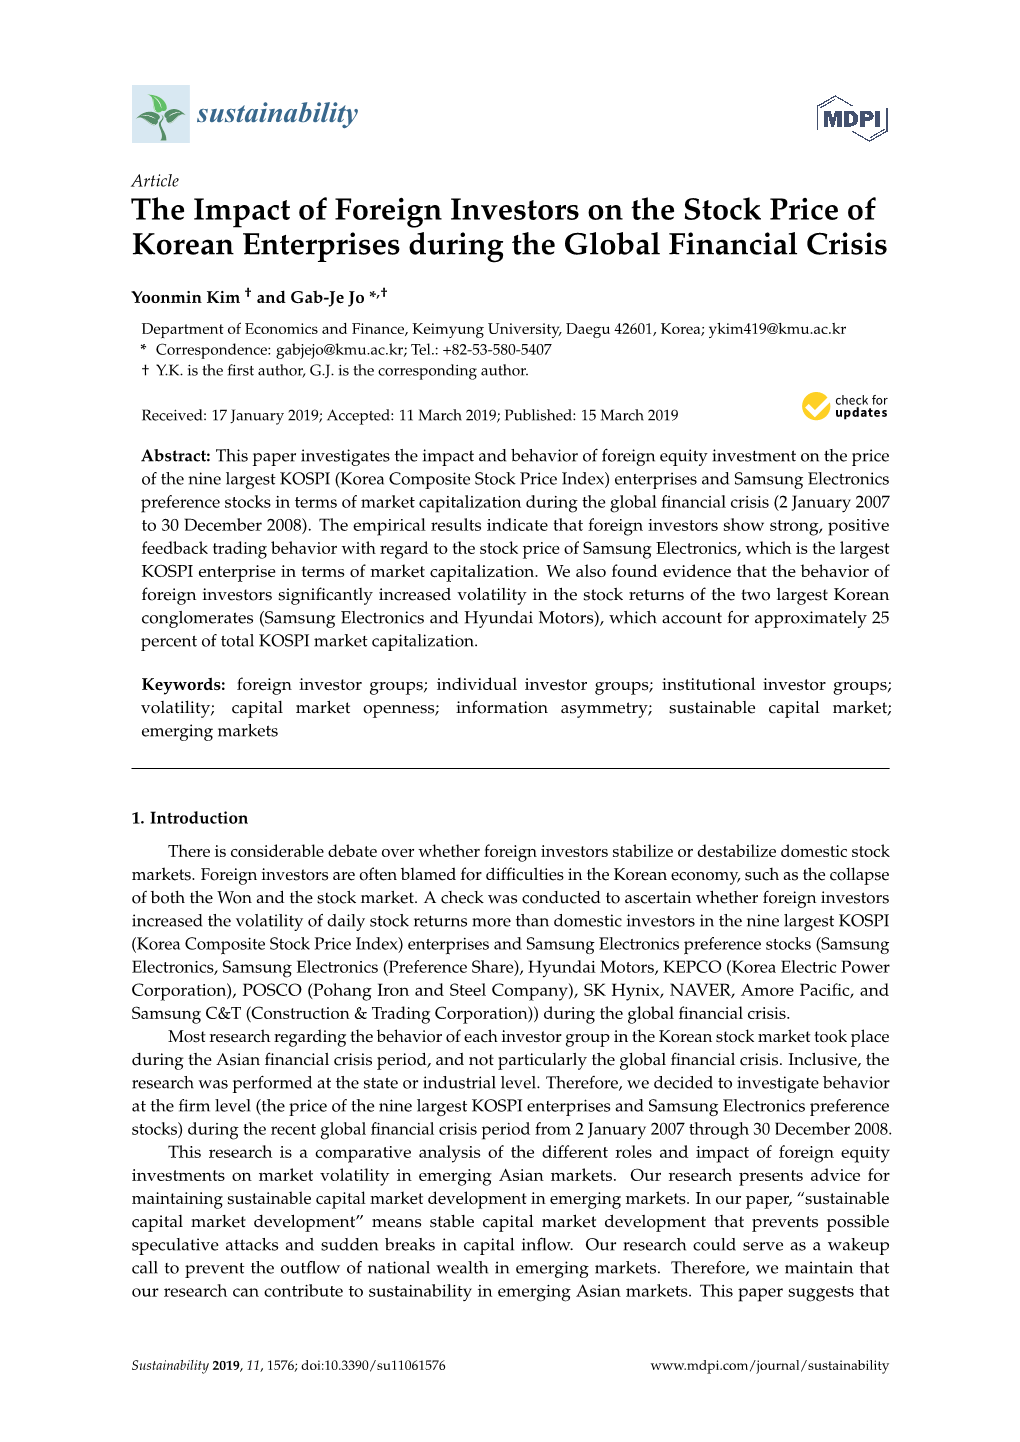 The Impact of Foreign Investors on the Stock Price of Korean Enterprises During the Global Financial Crisis